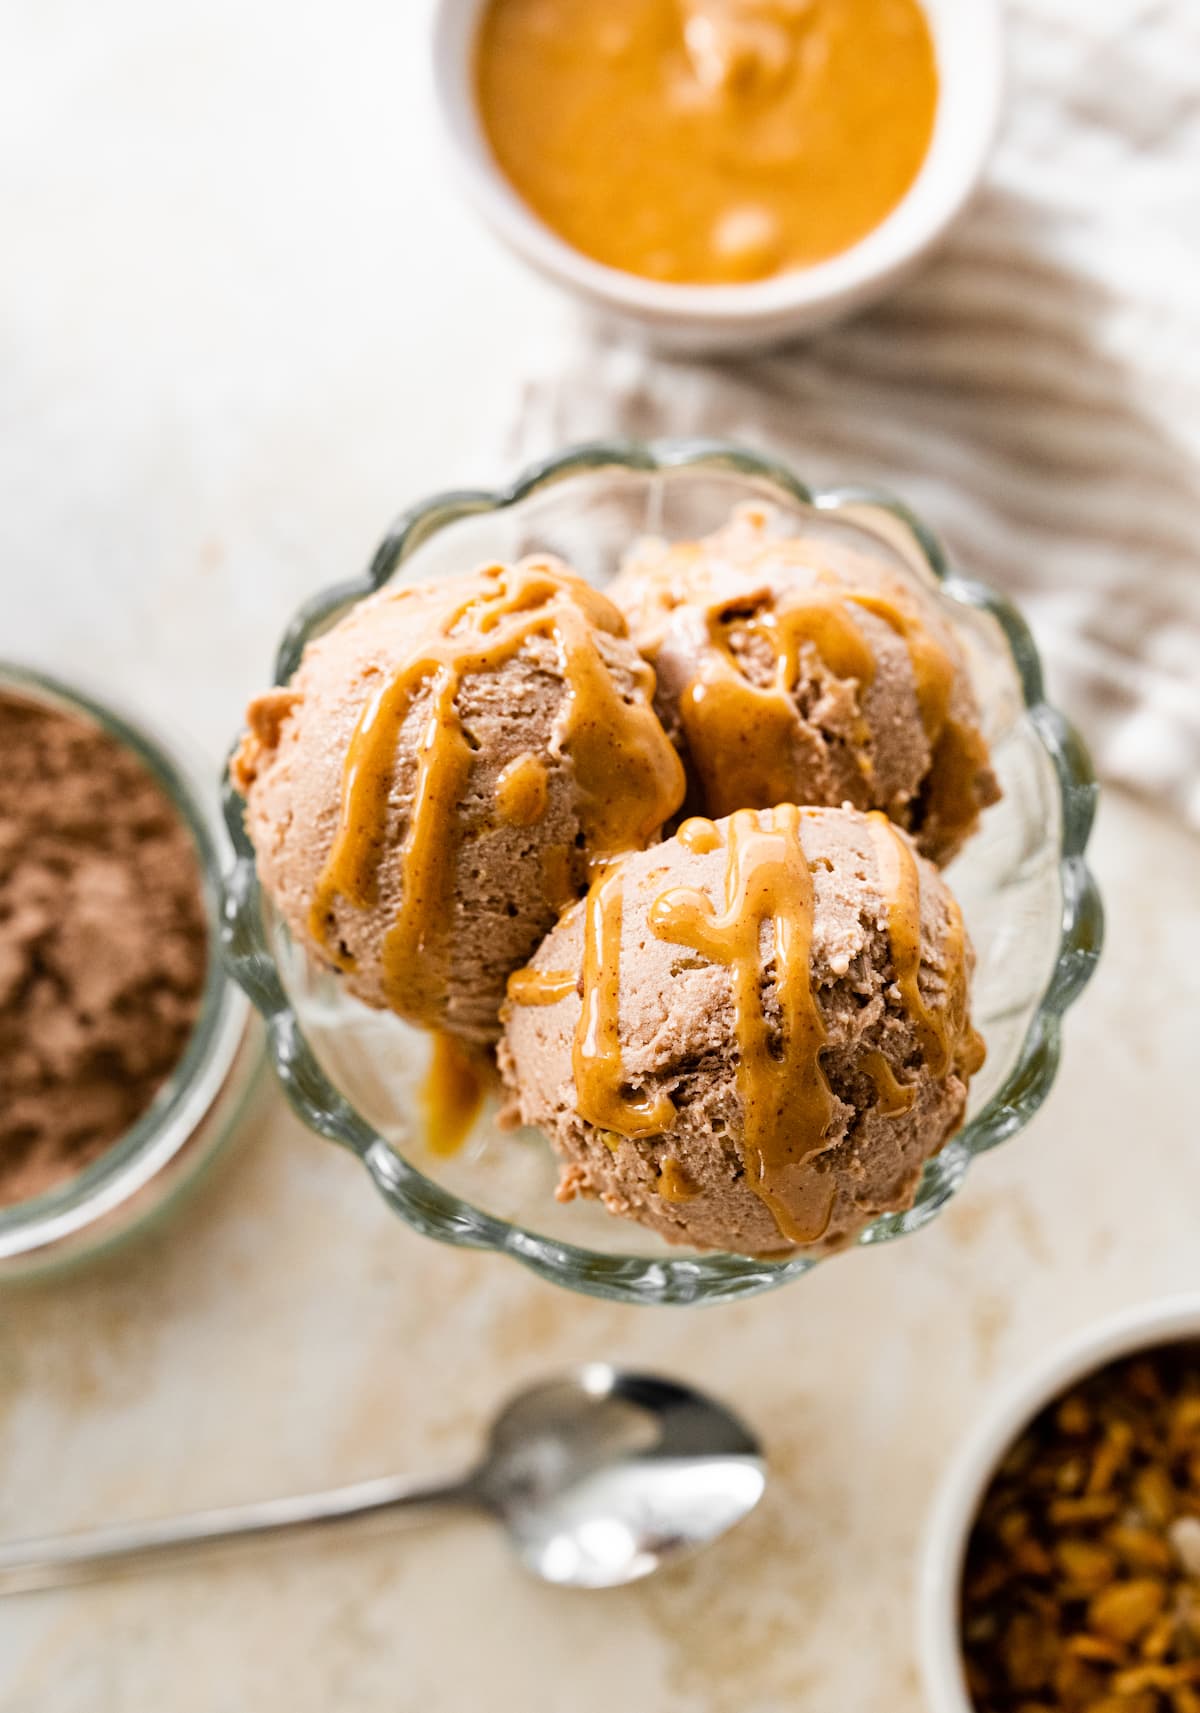 Chocolate peanut butter protein icee cream scooped in an ice cream bowl drizzled with peanut butter.